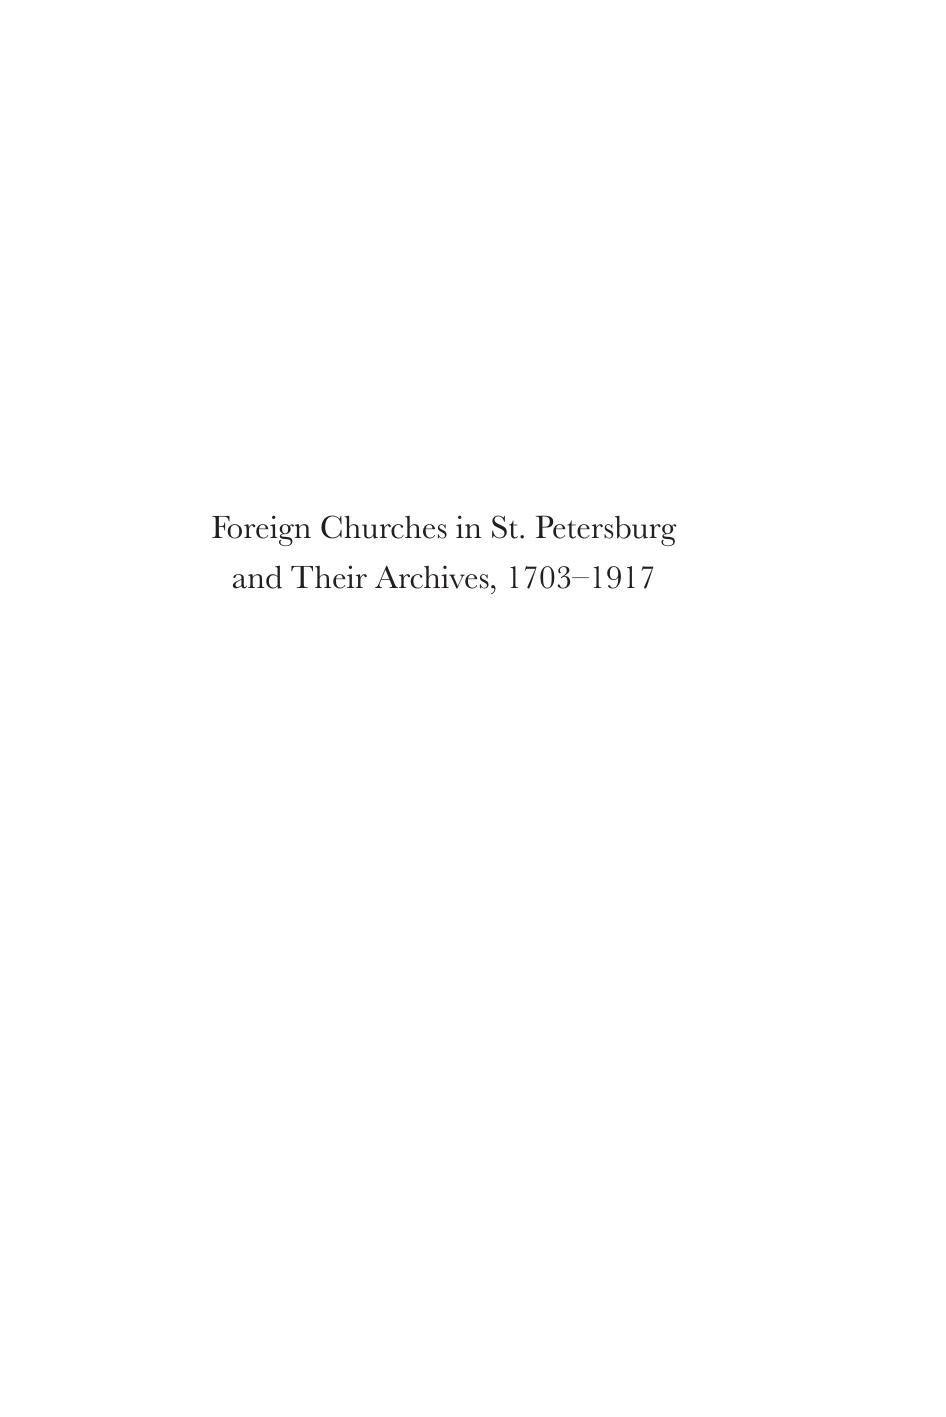 Foreign Churches in St. Petersburg and Their Archives, 1703-1917 by Pieter N. Holtrop